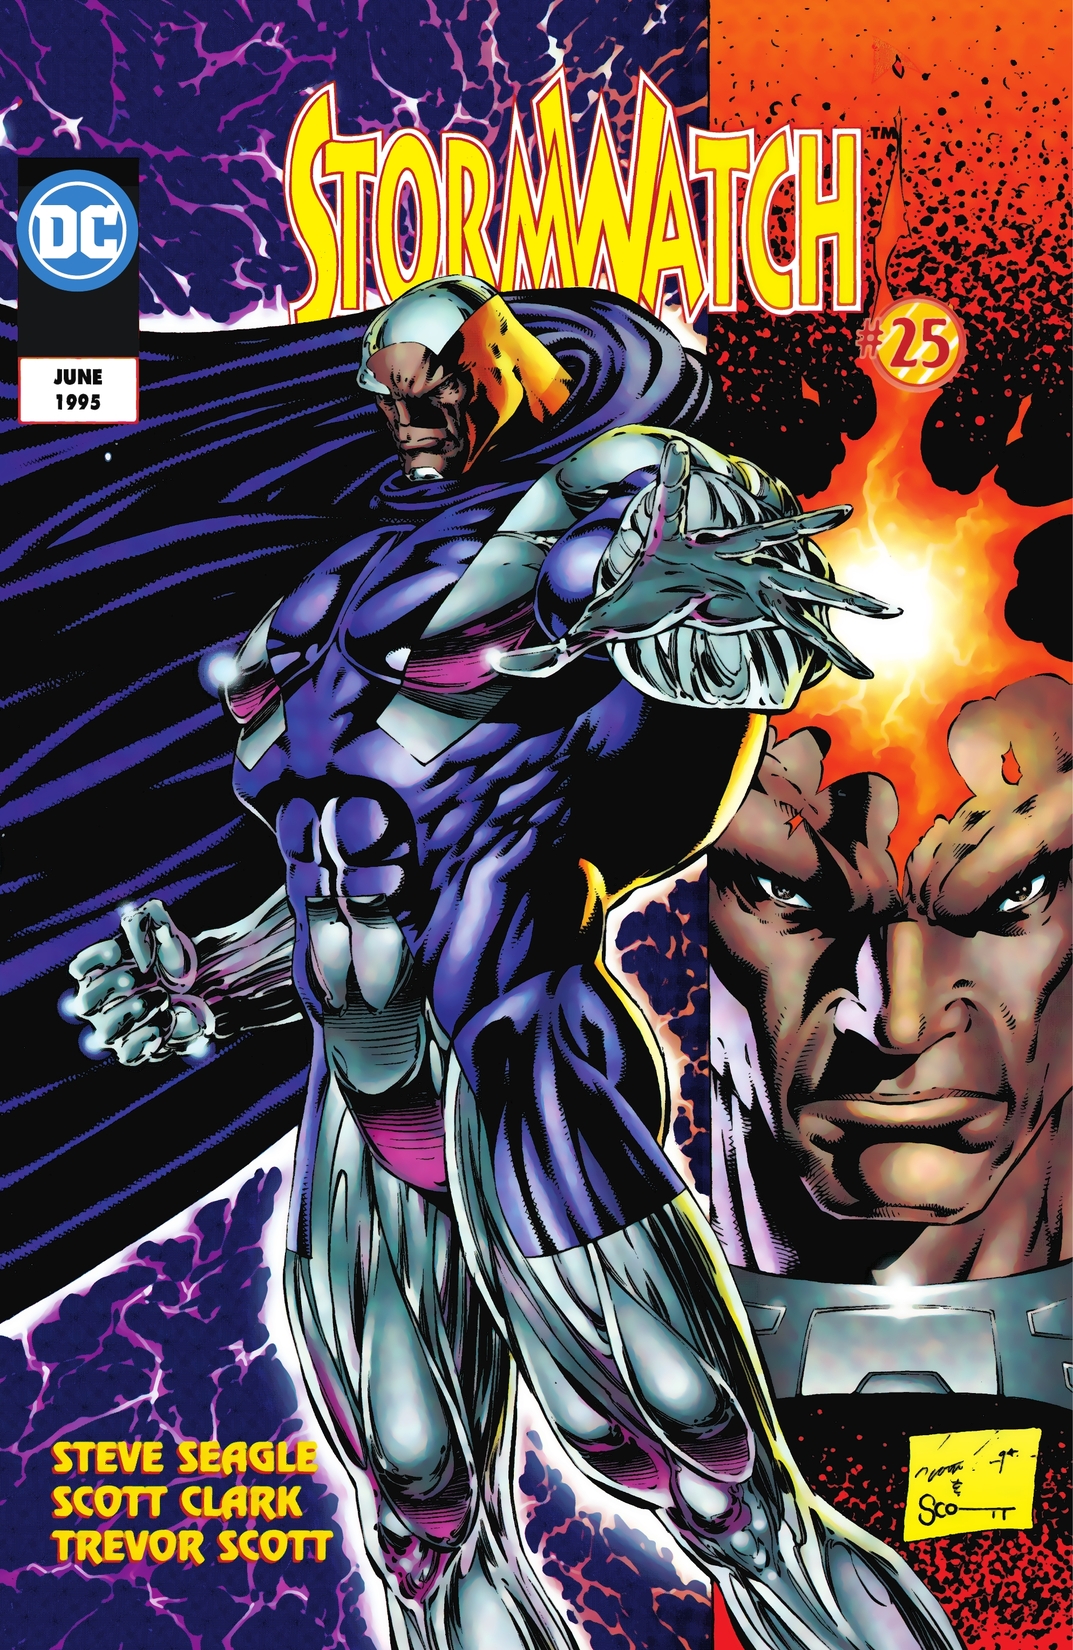 Stormwatch #25 preview images